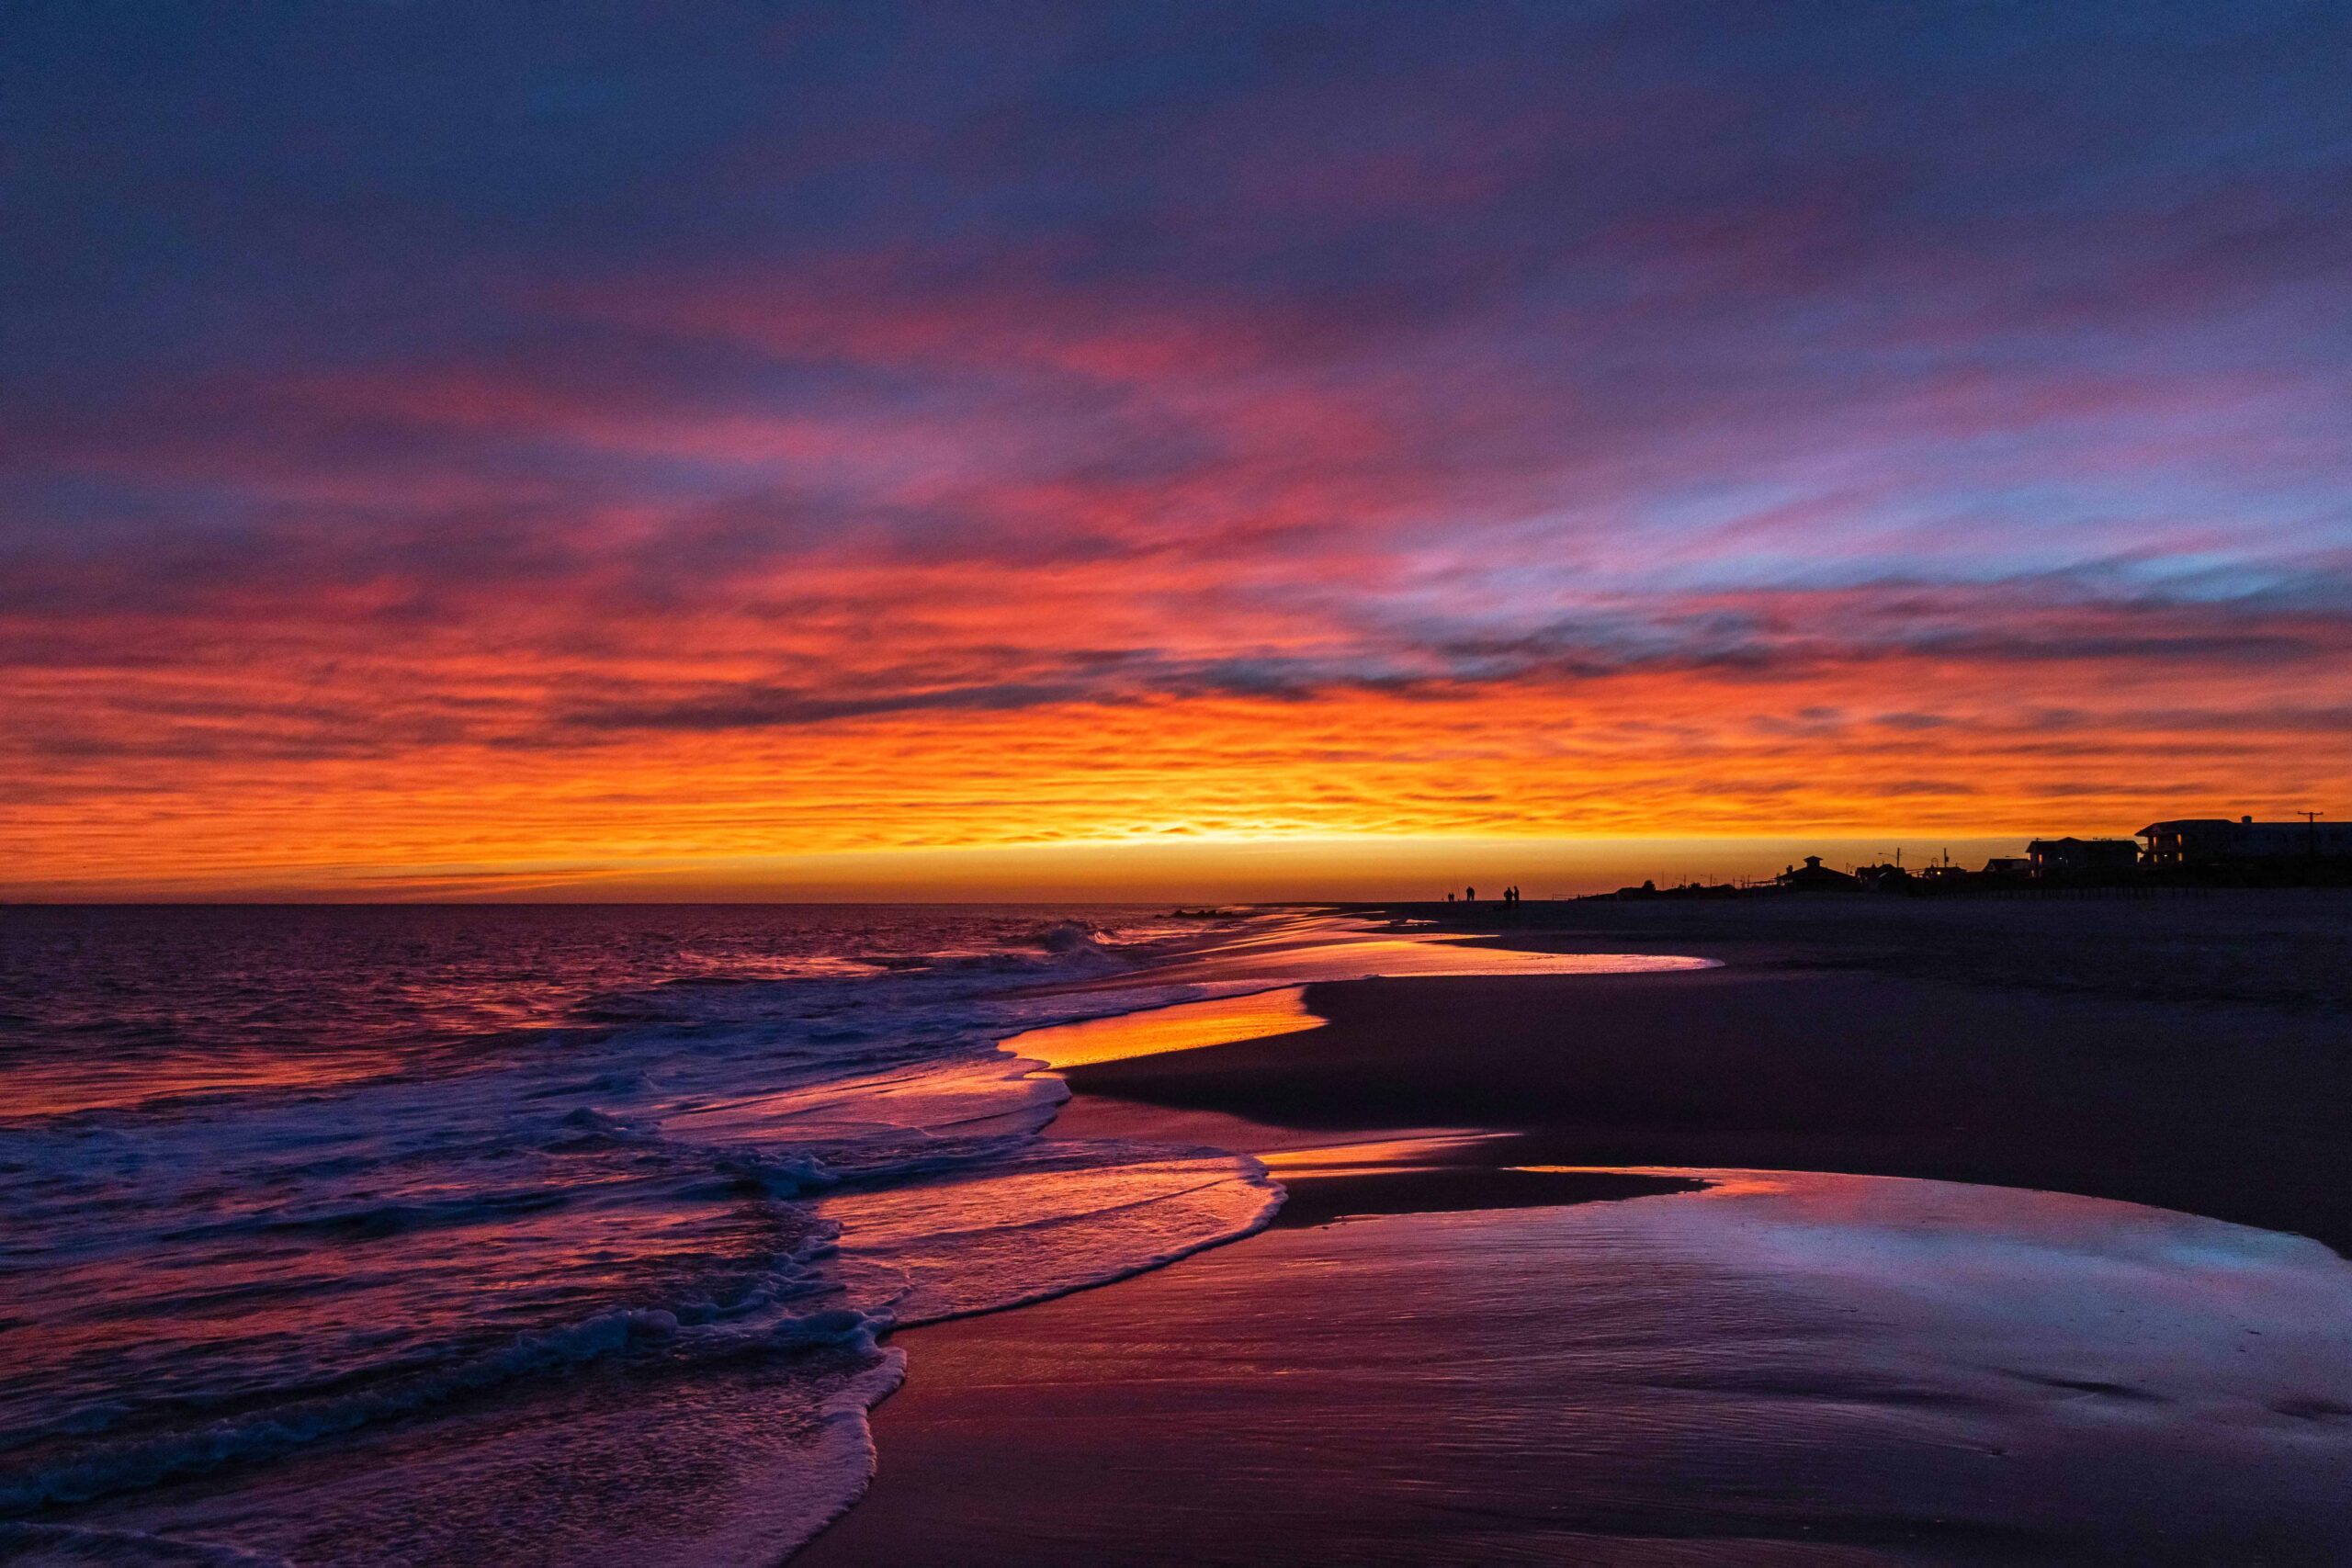 Blue, purple, red, pink, orange, and yellow colored clouds in the sky reflected in the ocean and sand at the beach at sunset